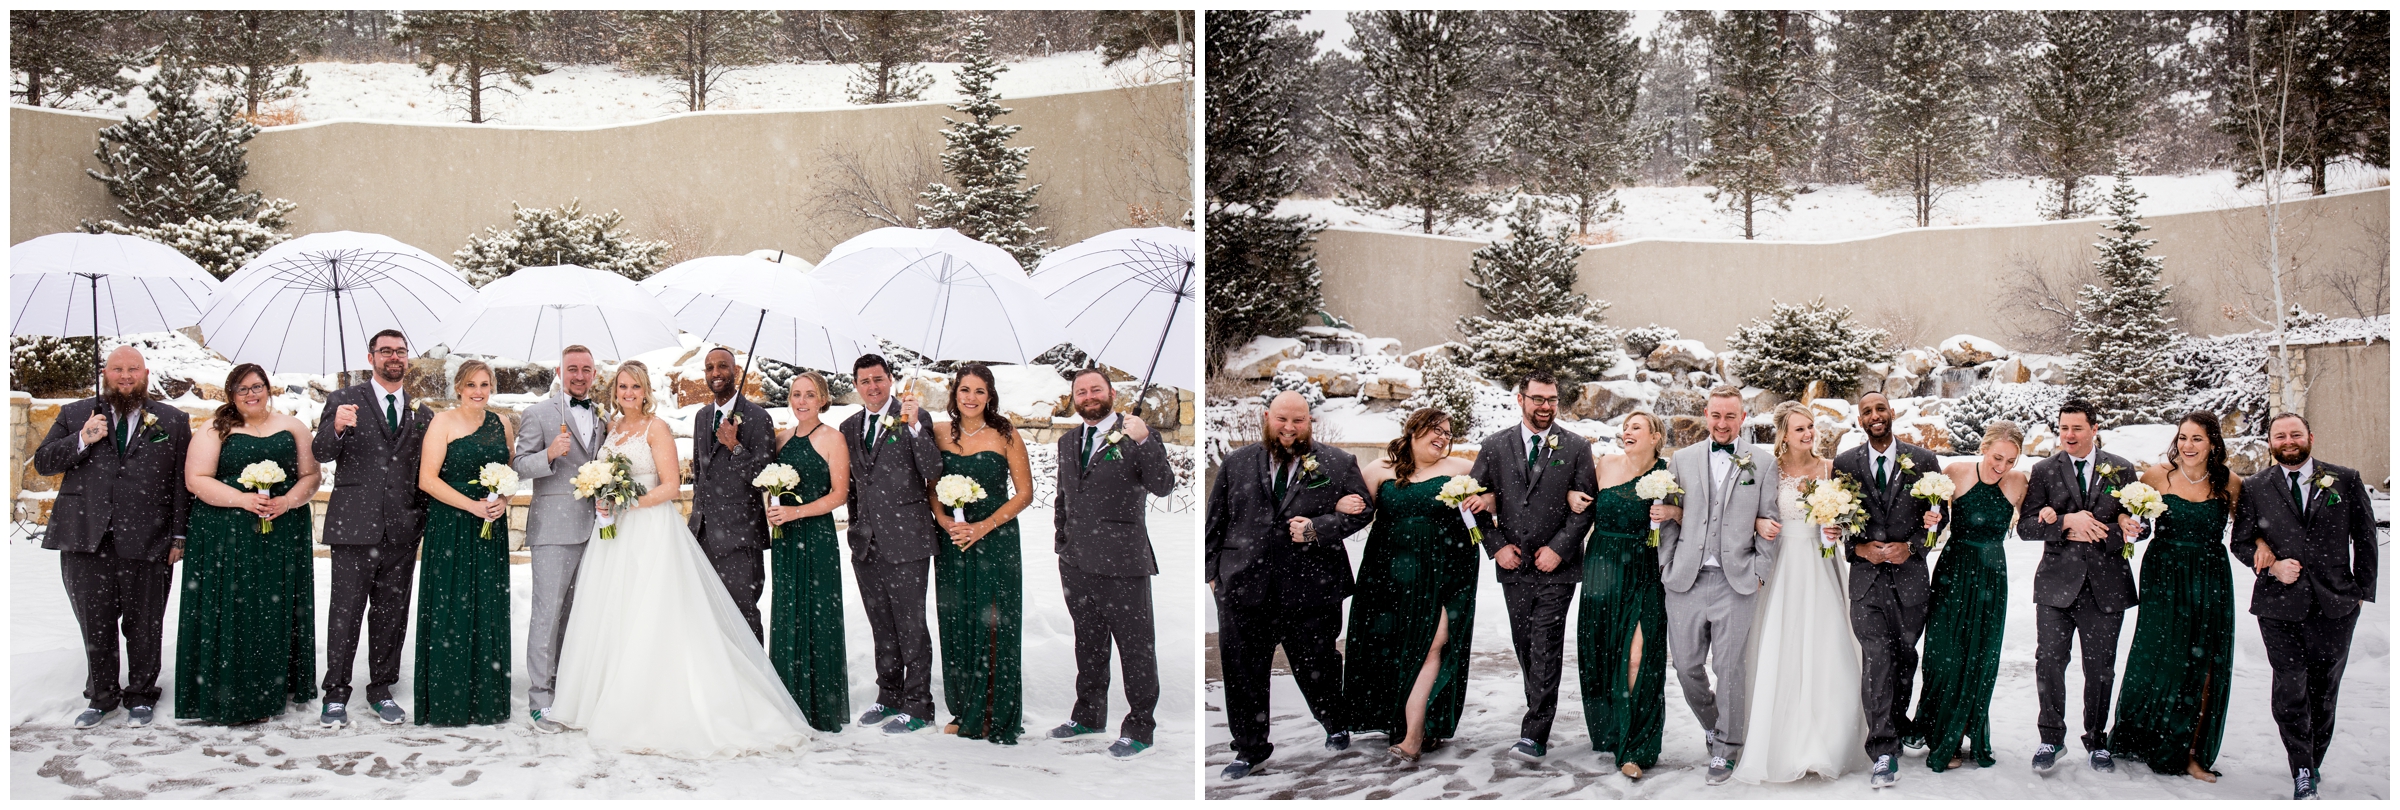 bridal party in green and gray holding umbrellas in the snow 